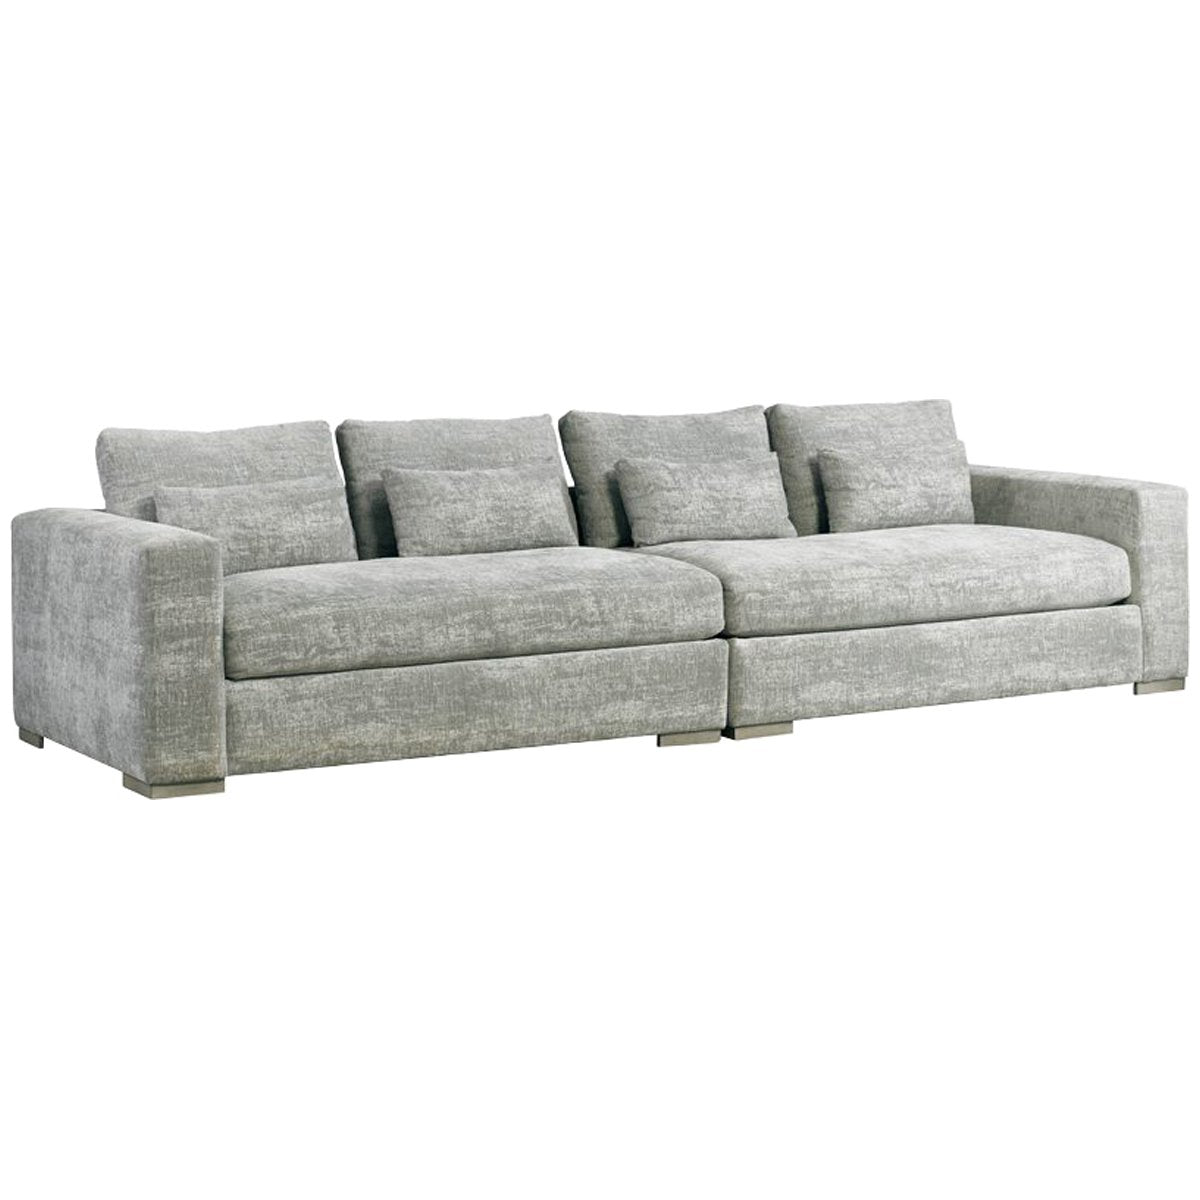 Lillian August Corso Two-Piece Sofa Sectional with Knife Edge Back